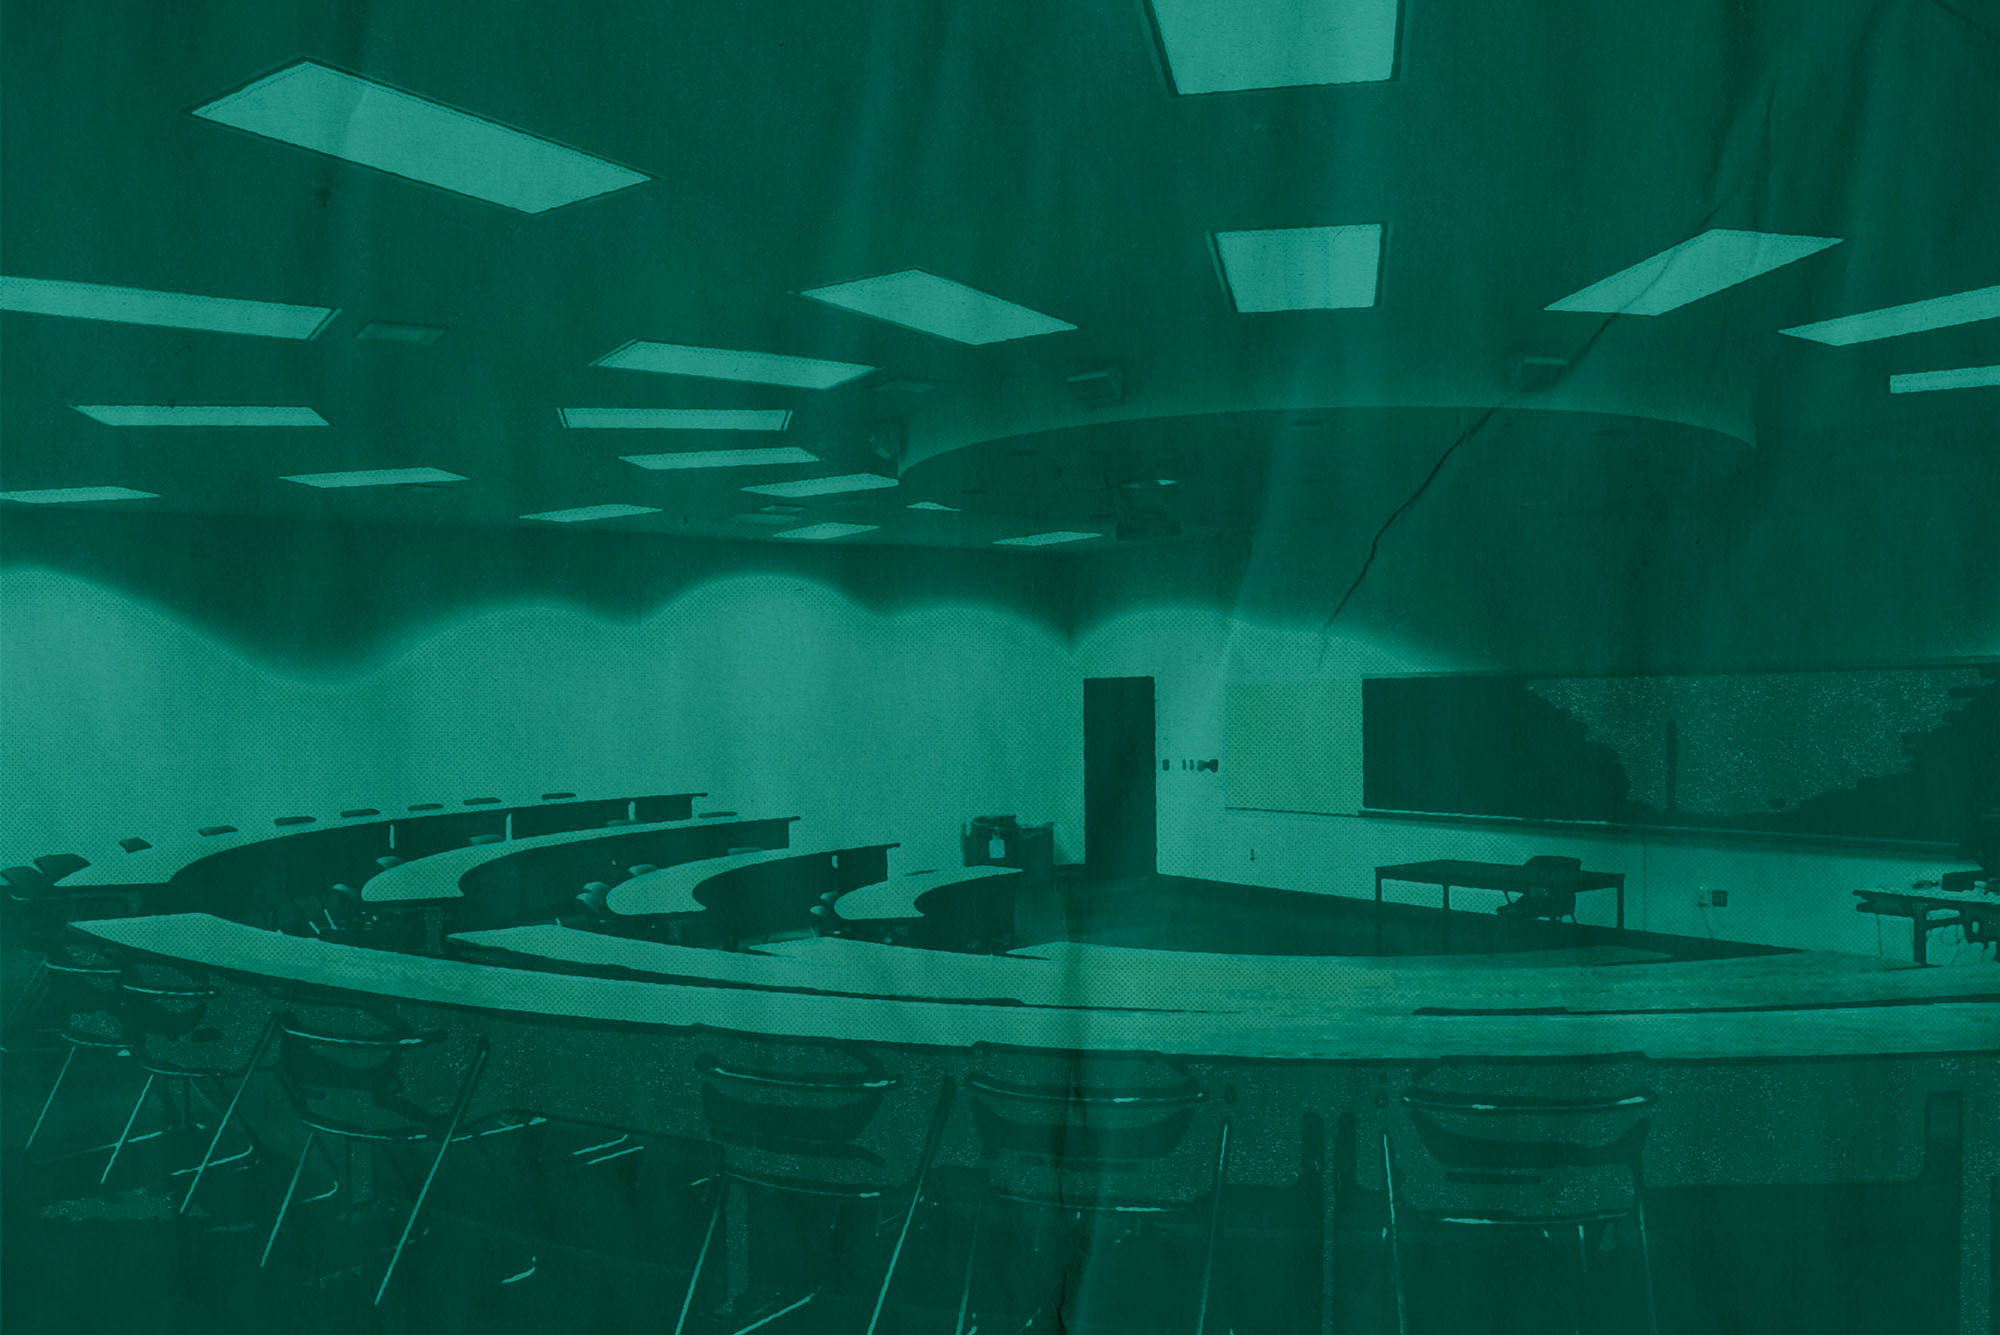 A university classroom with theatre-style crescent seating. The entire canvas is tinted green